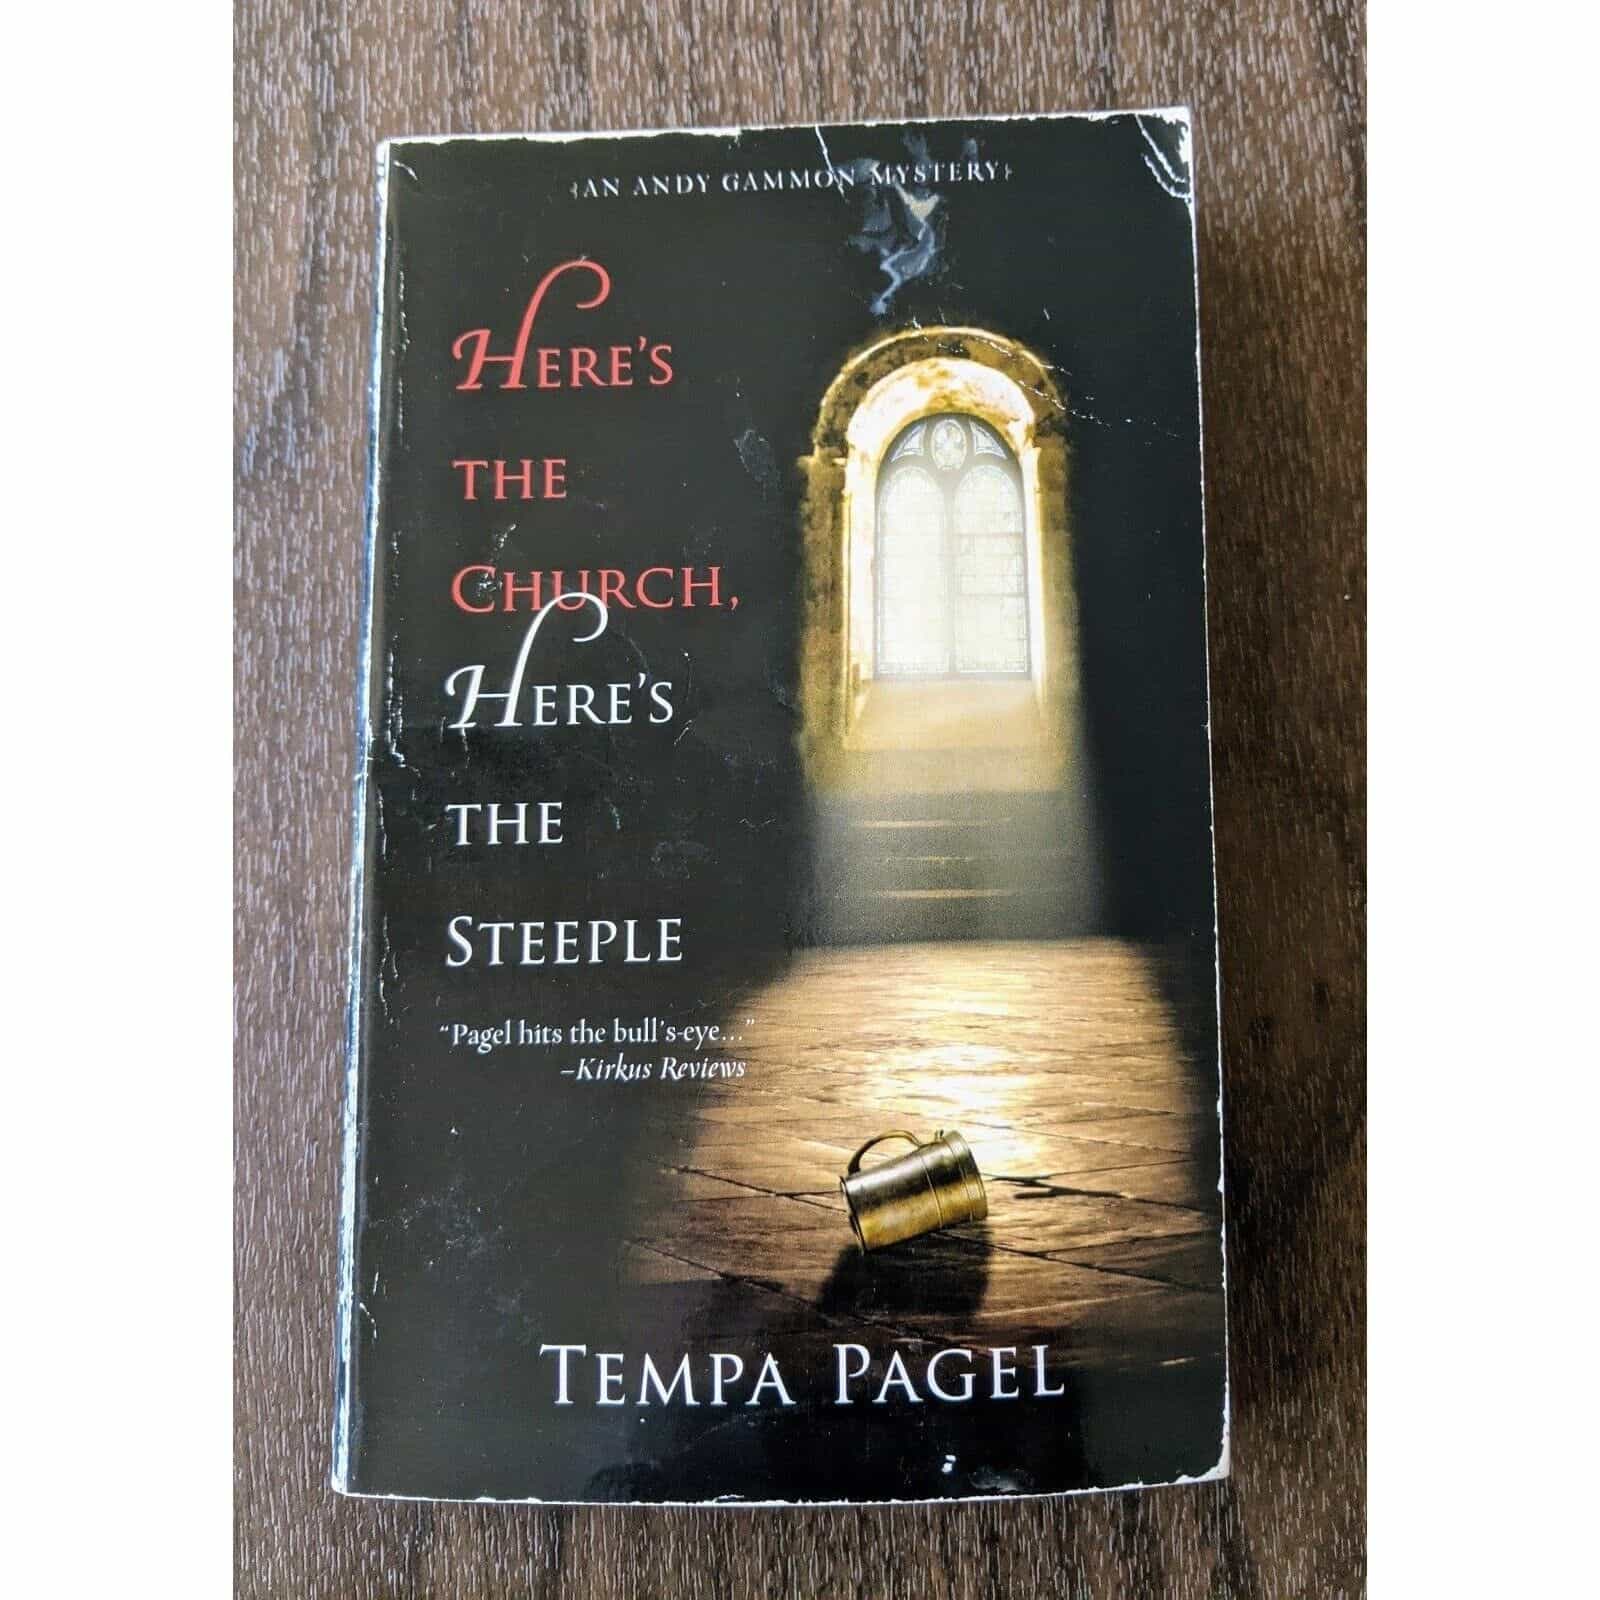 Here’s The Church, Here’s The Steeple by Tempa Pagel Book – 2007